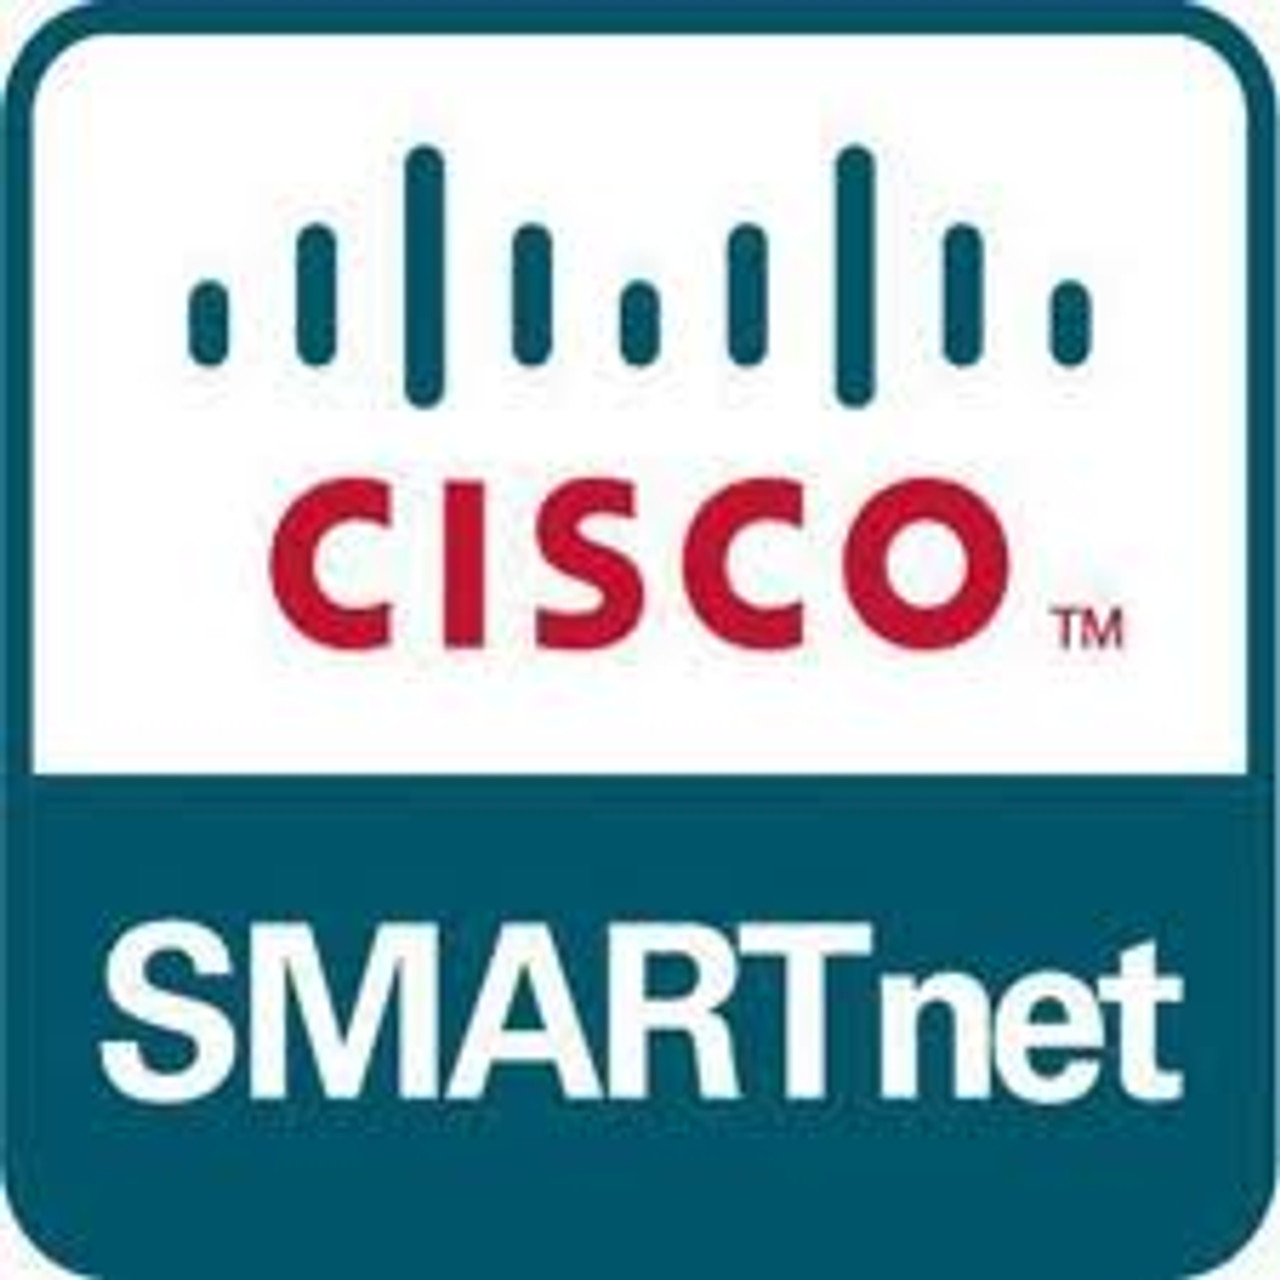 Cisco SMARTnet with 8x5 next business day hardware advance replacement